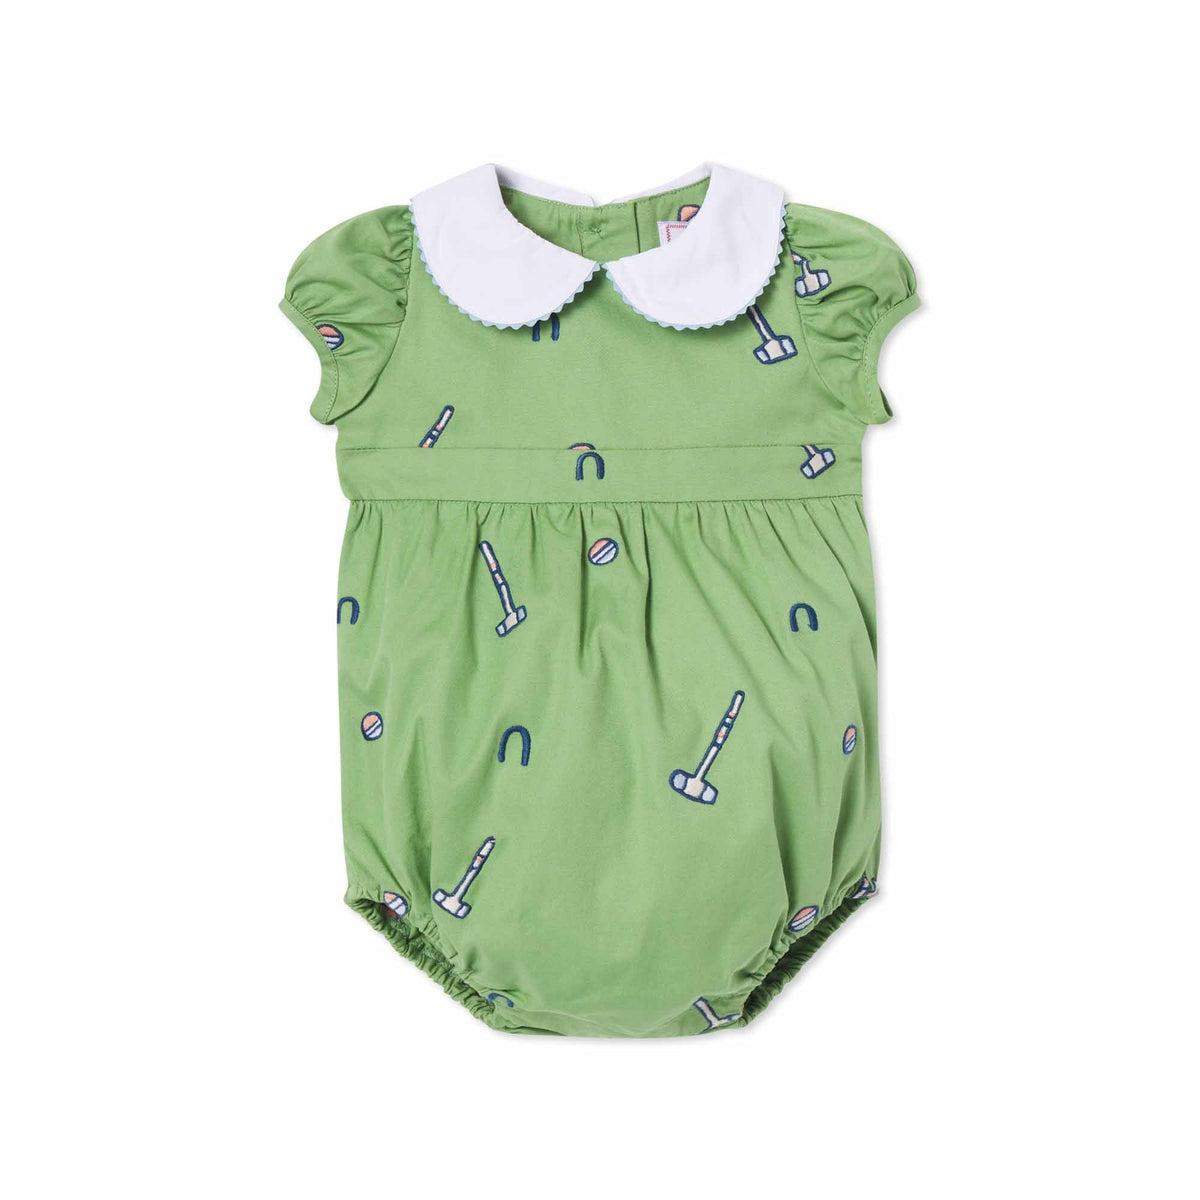 Classic and Preppy Juniper Bubble, Meadow Green Croquet Embroidery-Baby Rompers-Croquets on Meadow Green-0-3M-CPC - Classic Prep Childrenswear